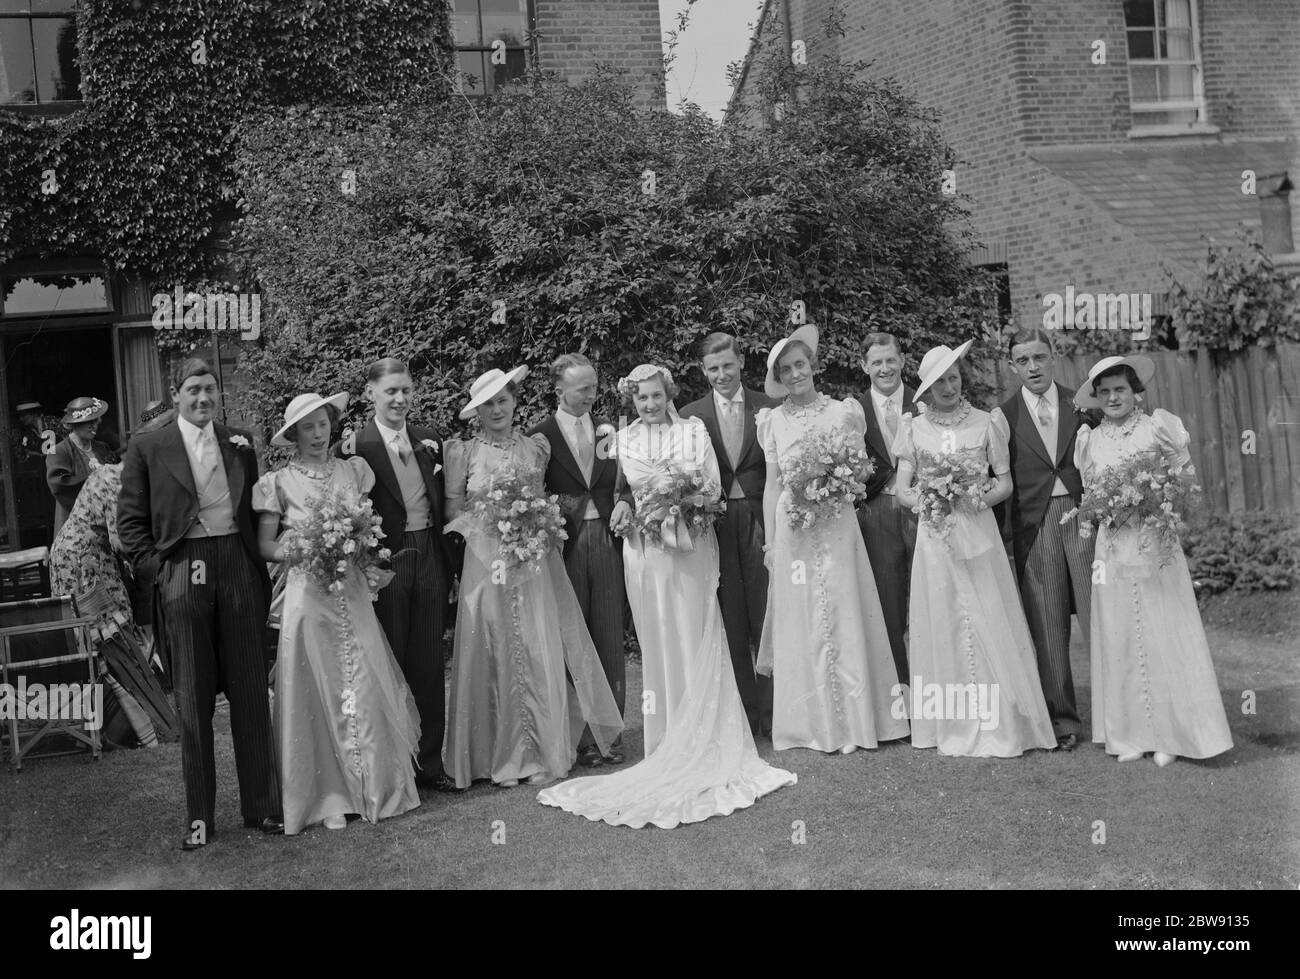 The wedding of Smith and Turnbull . The wedding party . 19 June 1937 Stock Photo